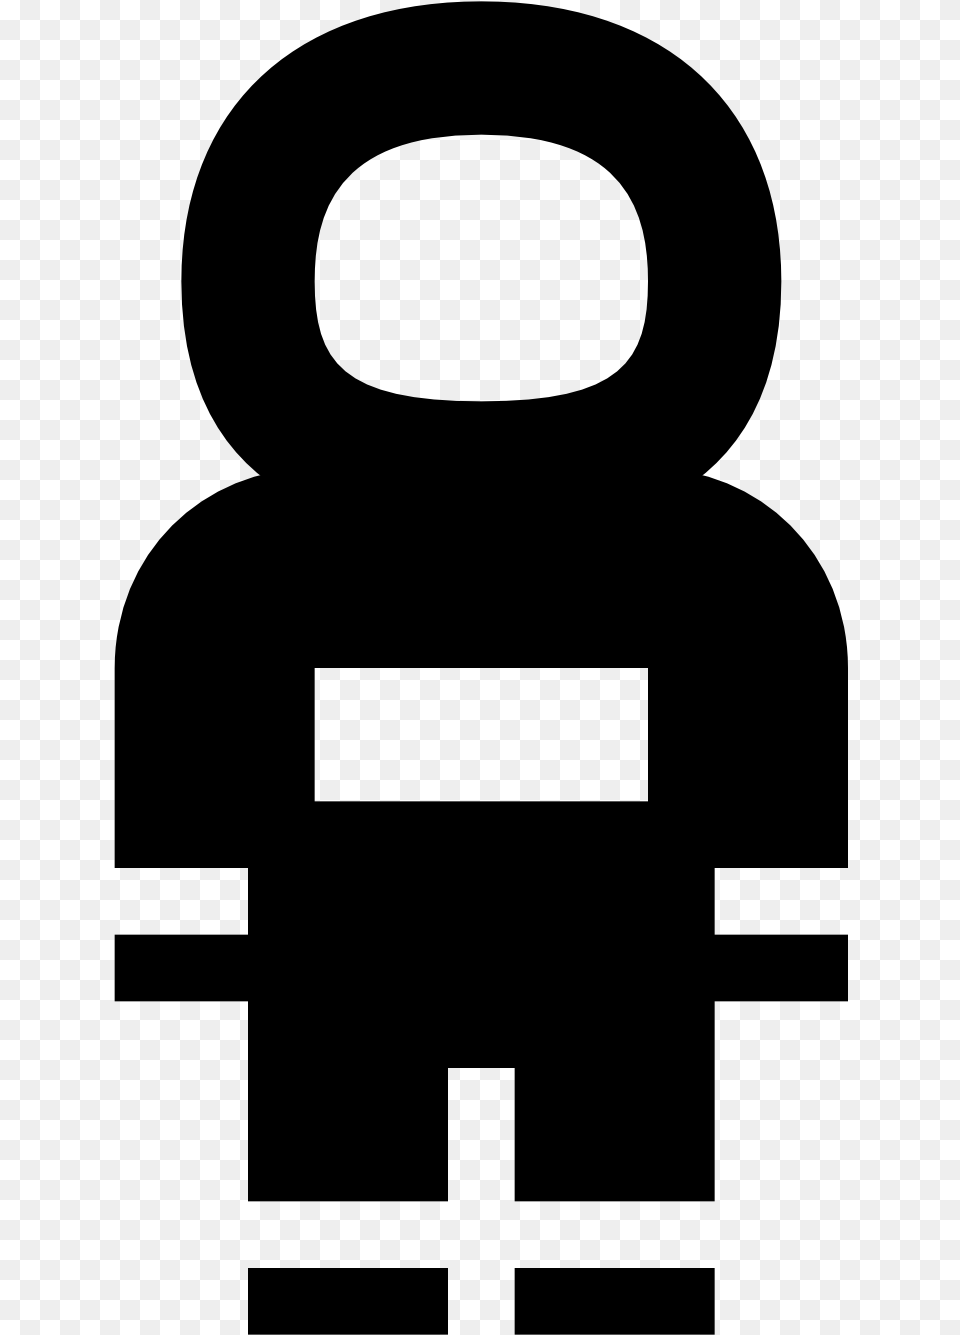 Astronaut Icon At Icons8 Astronaut Icon White, Gray Png Image